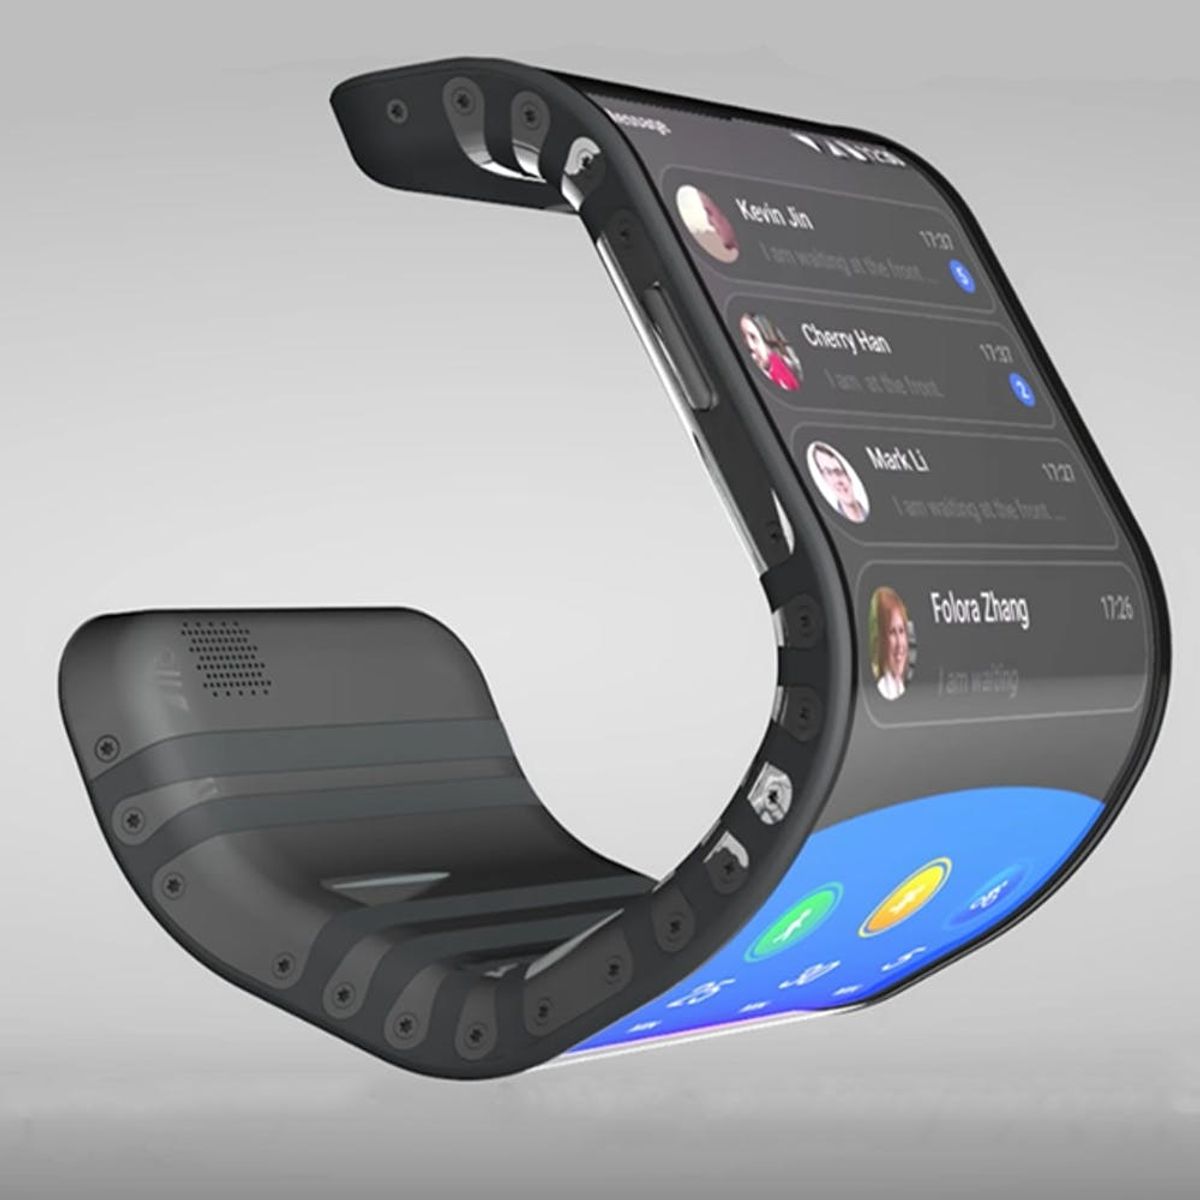 Bendable Smartphones Have Officially Arrived and They’re About to Change Your Life